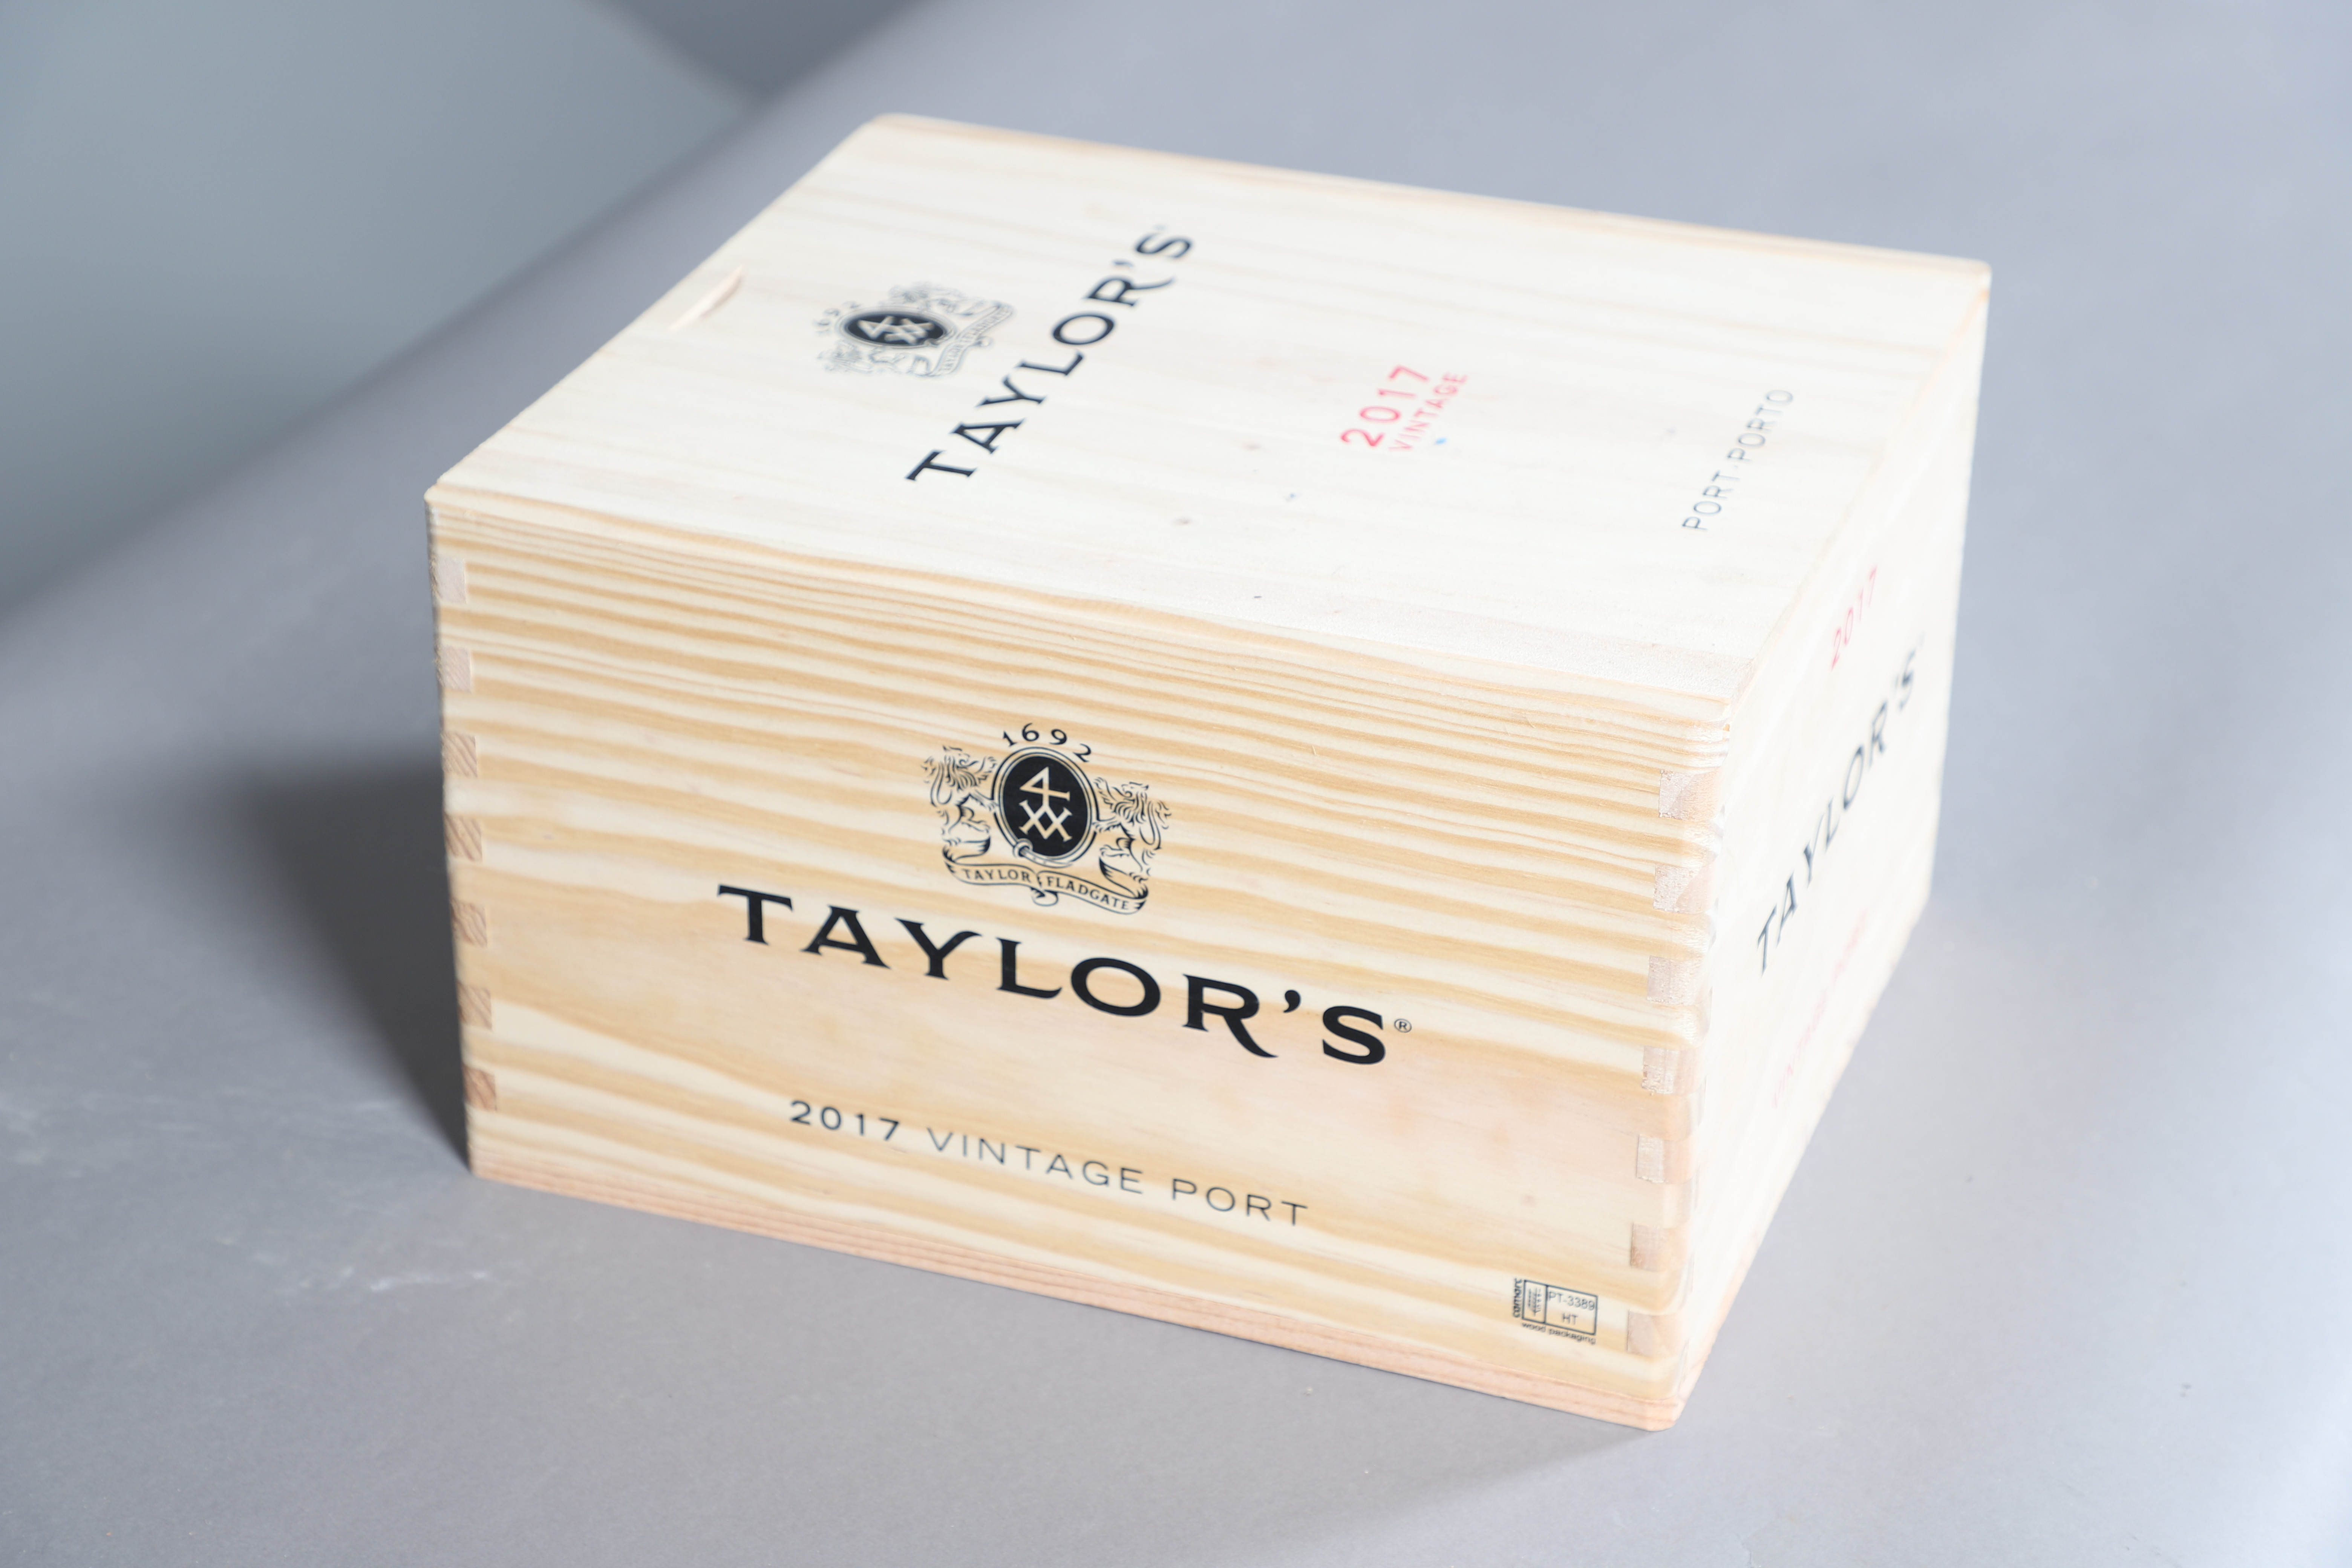 TAYLOR'S VINTAGE PORT 2017 - BOXED. - Image 3 of 5